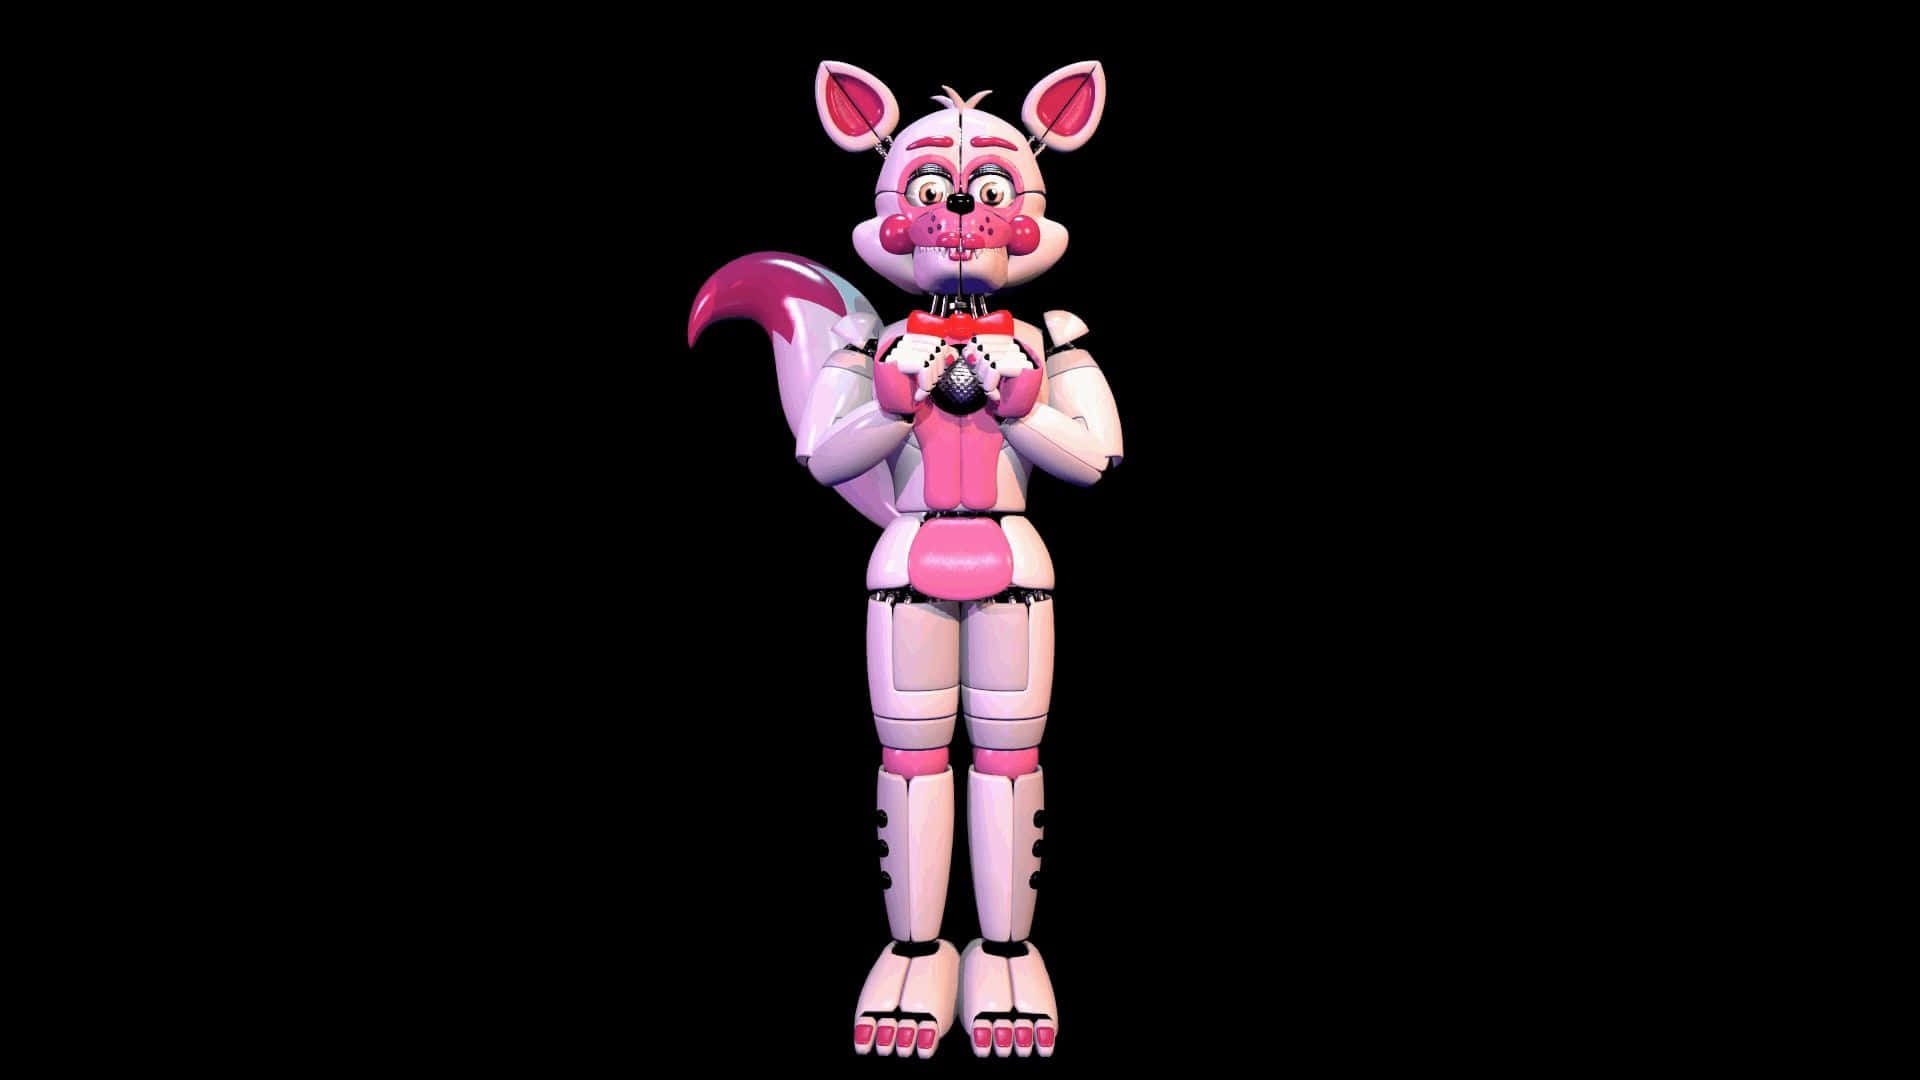 Funtime Foxy striking a pose on stage in vibrant colors Wallpaper